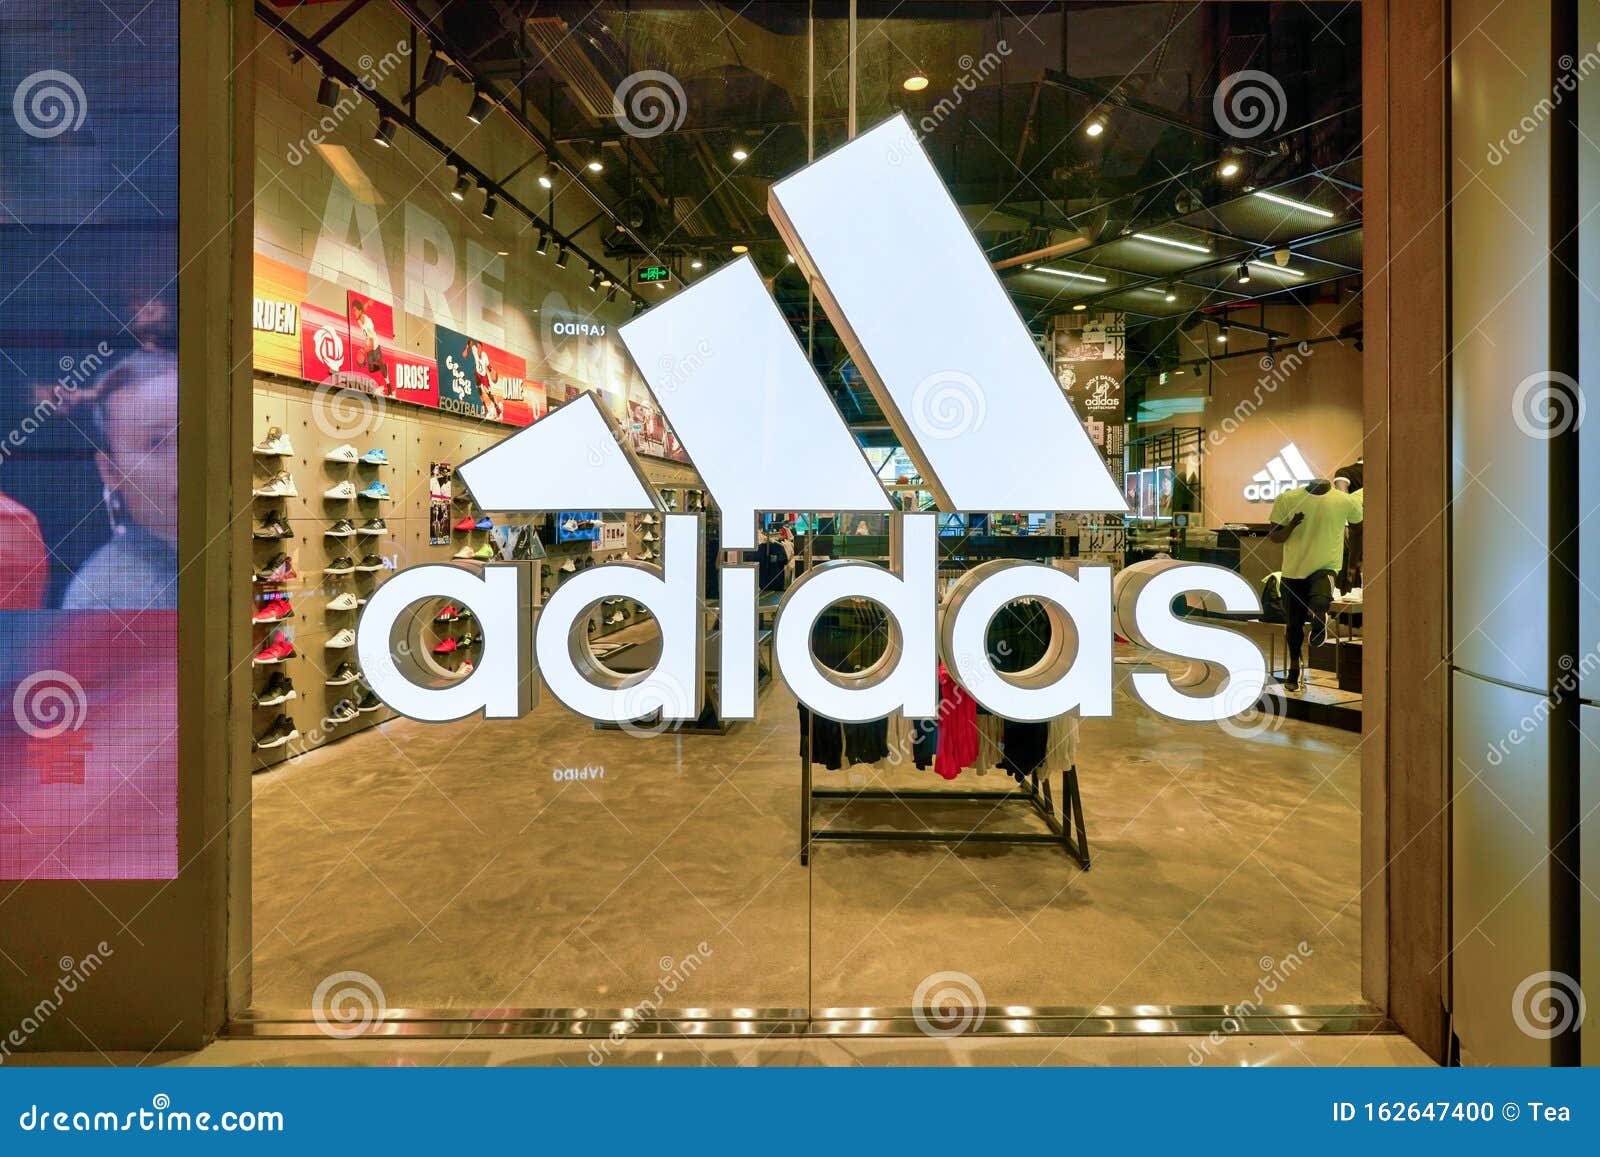 adidas store close by